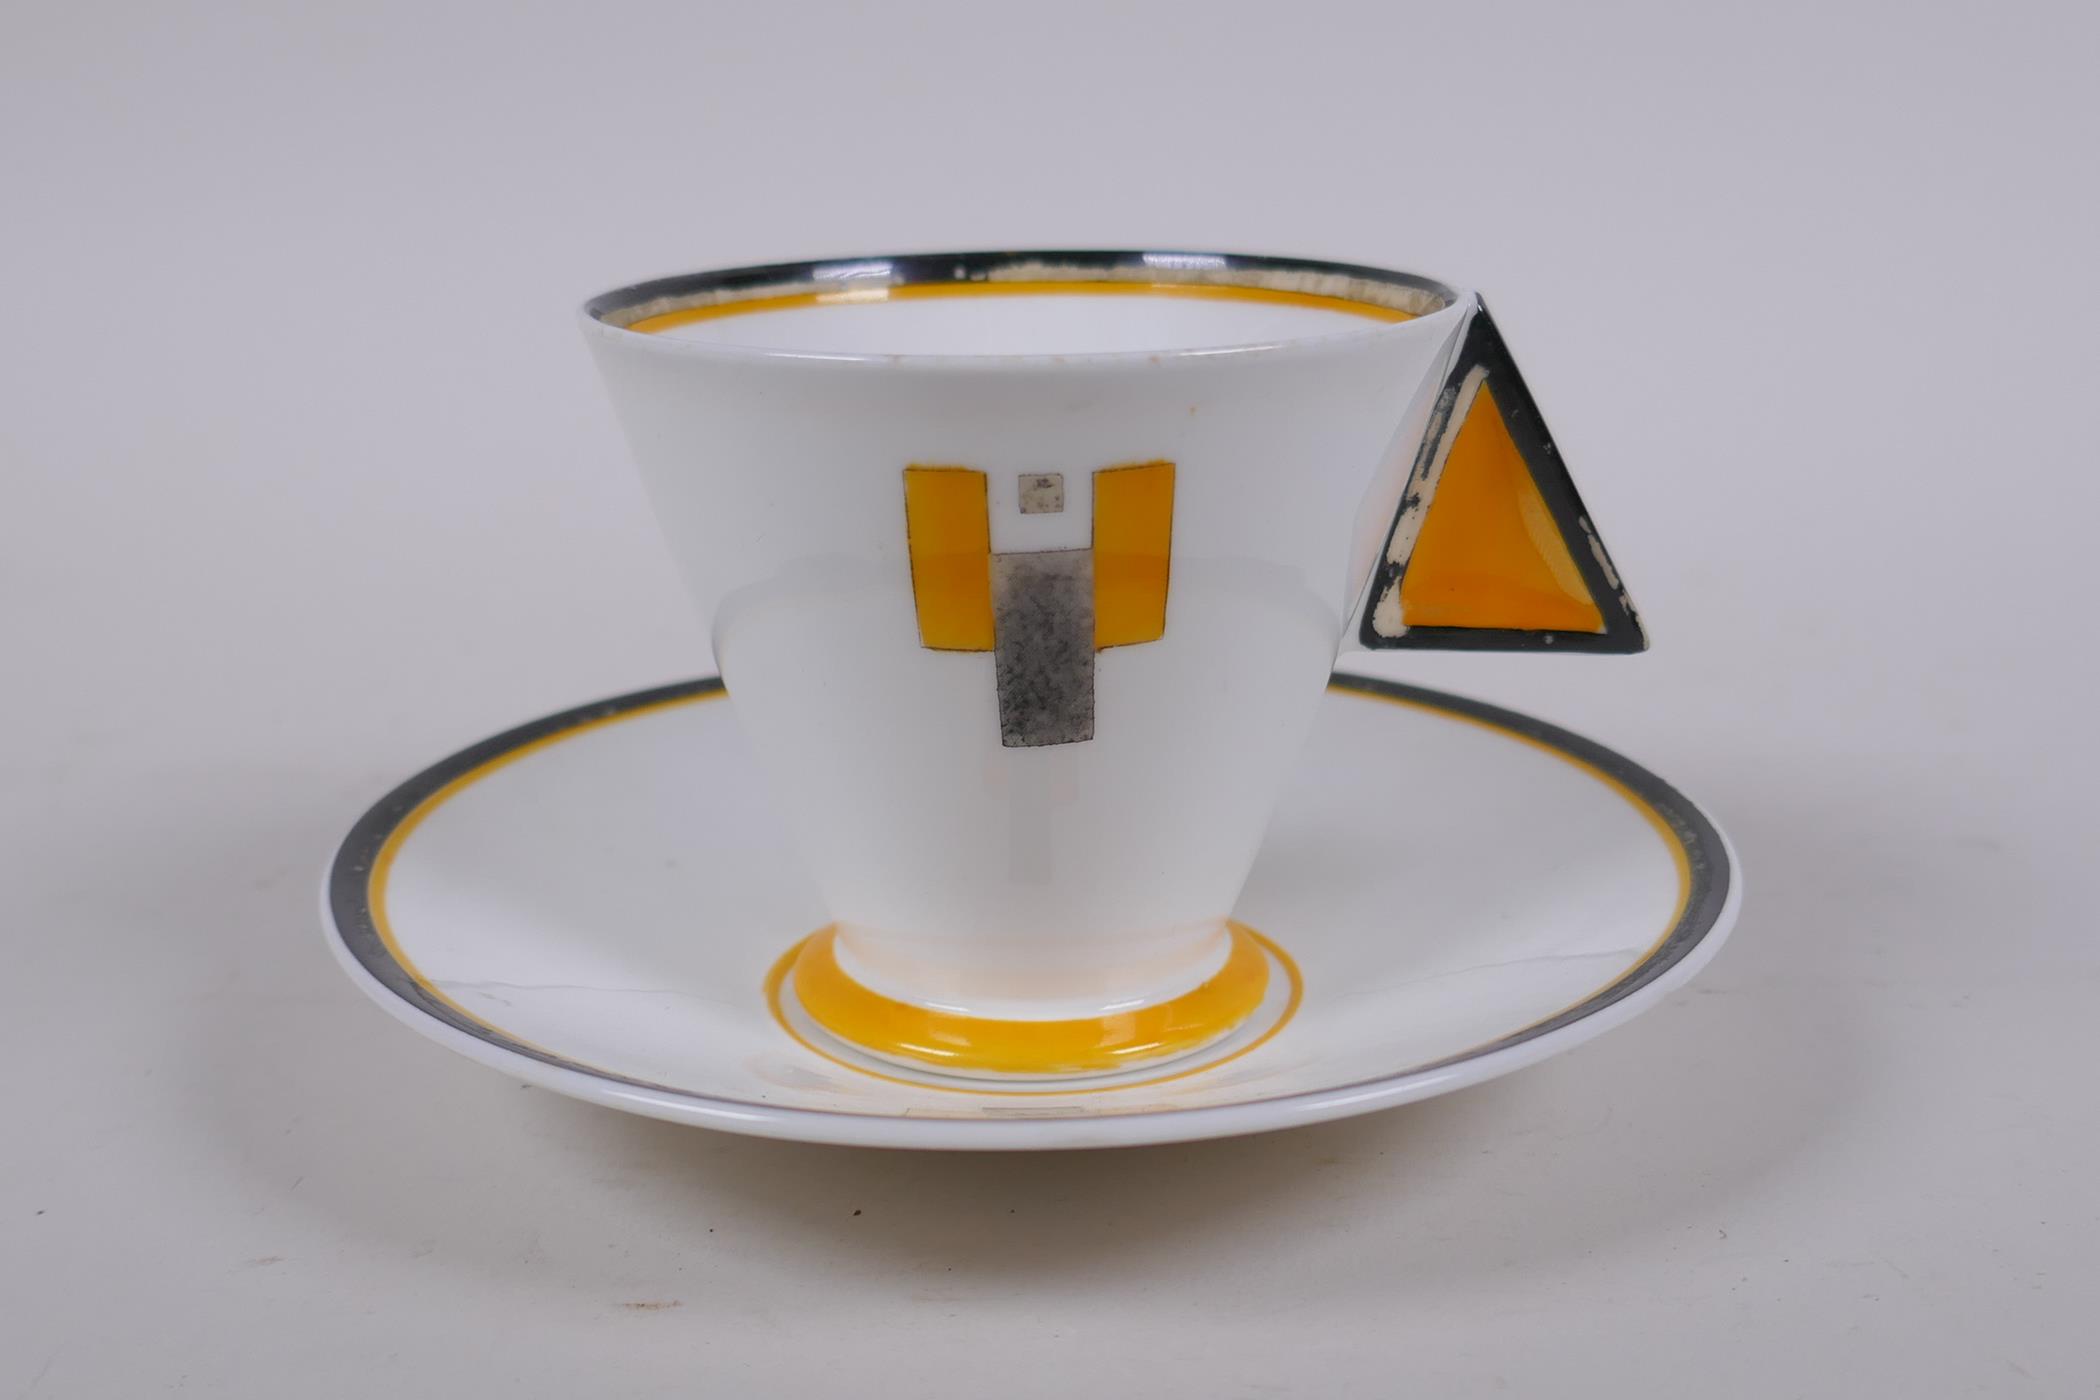 Three 1930 Shelley Art Deco 'Vogue' shaped cup and saucers in the Yellow Blocks pattern, designed by - Image 3 of 5